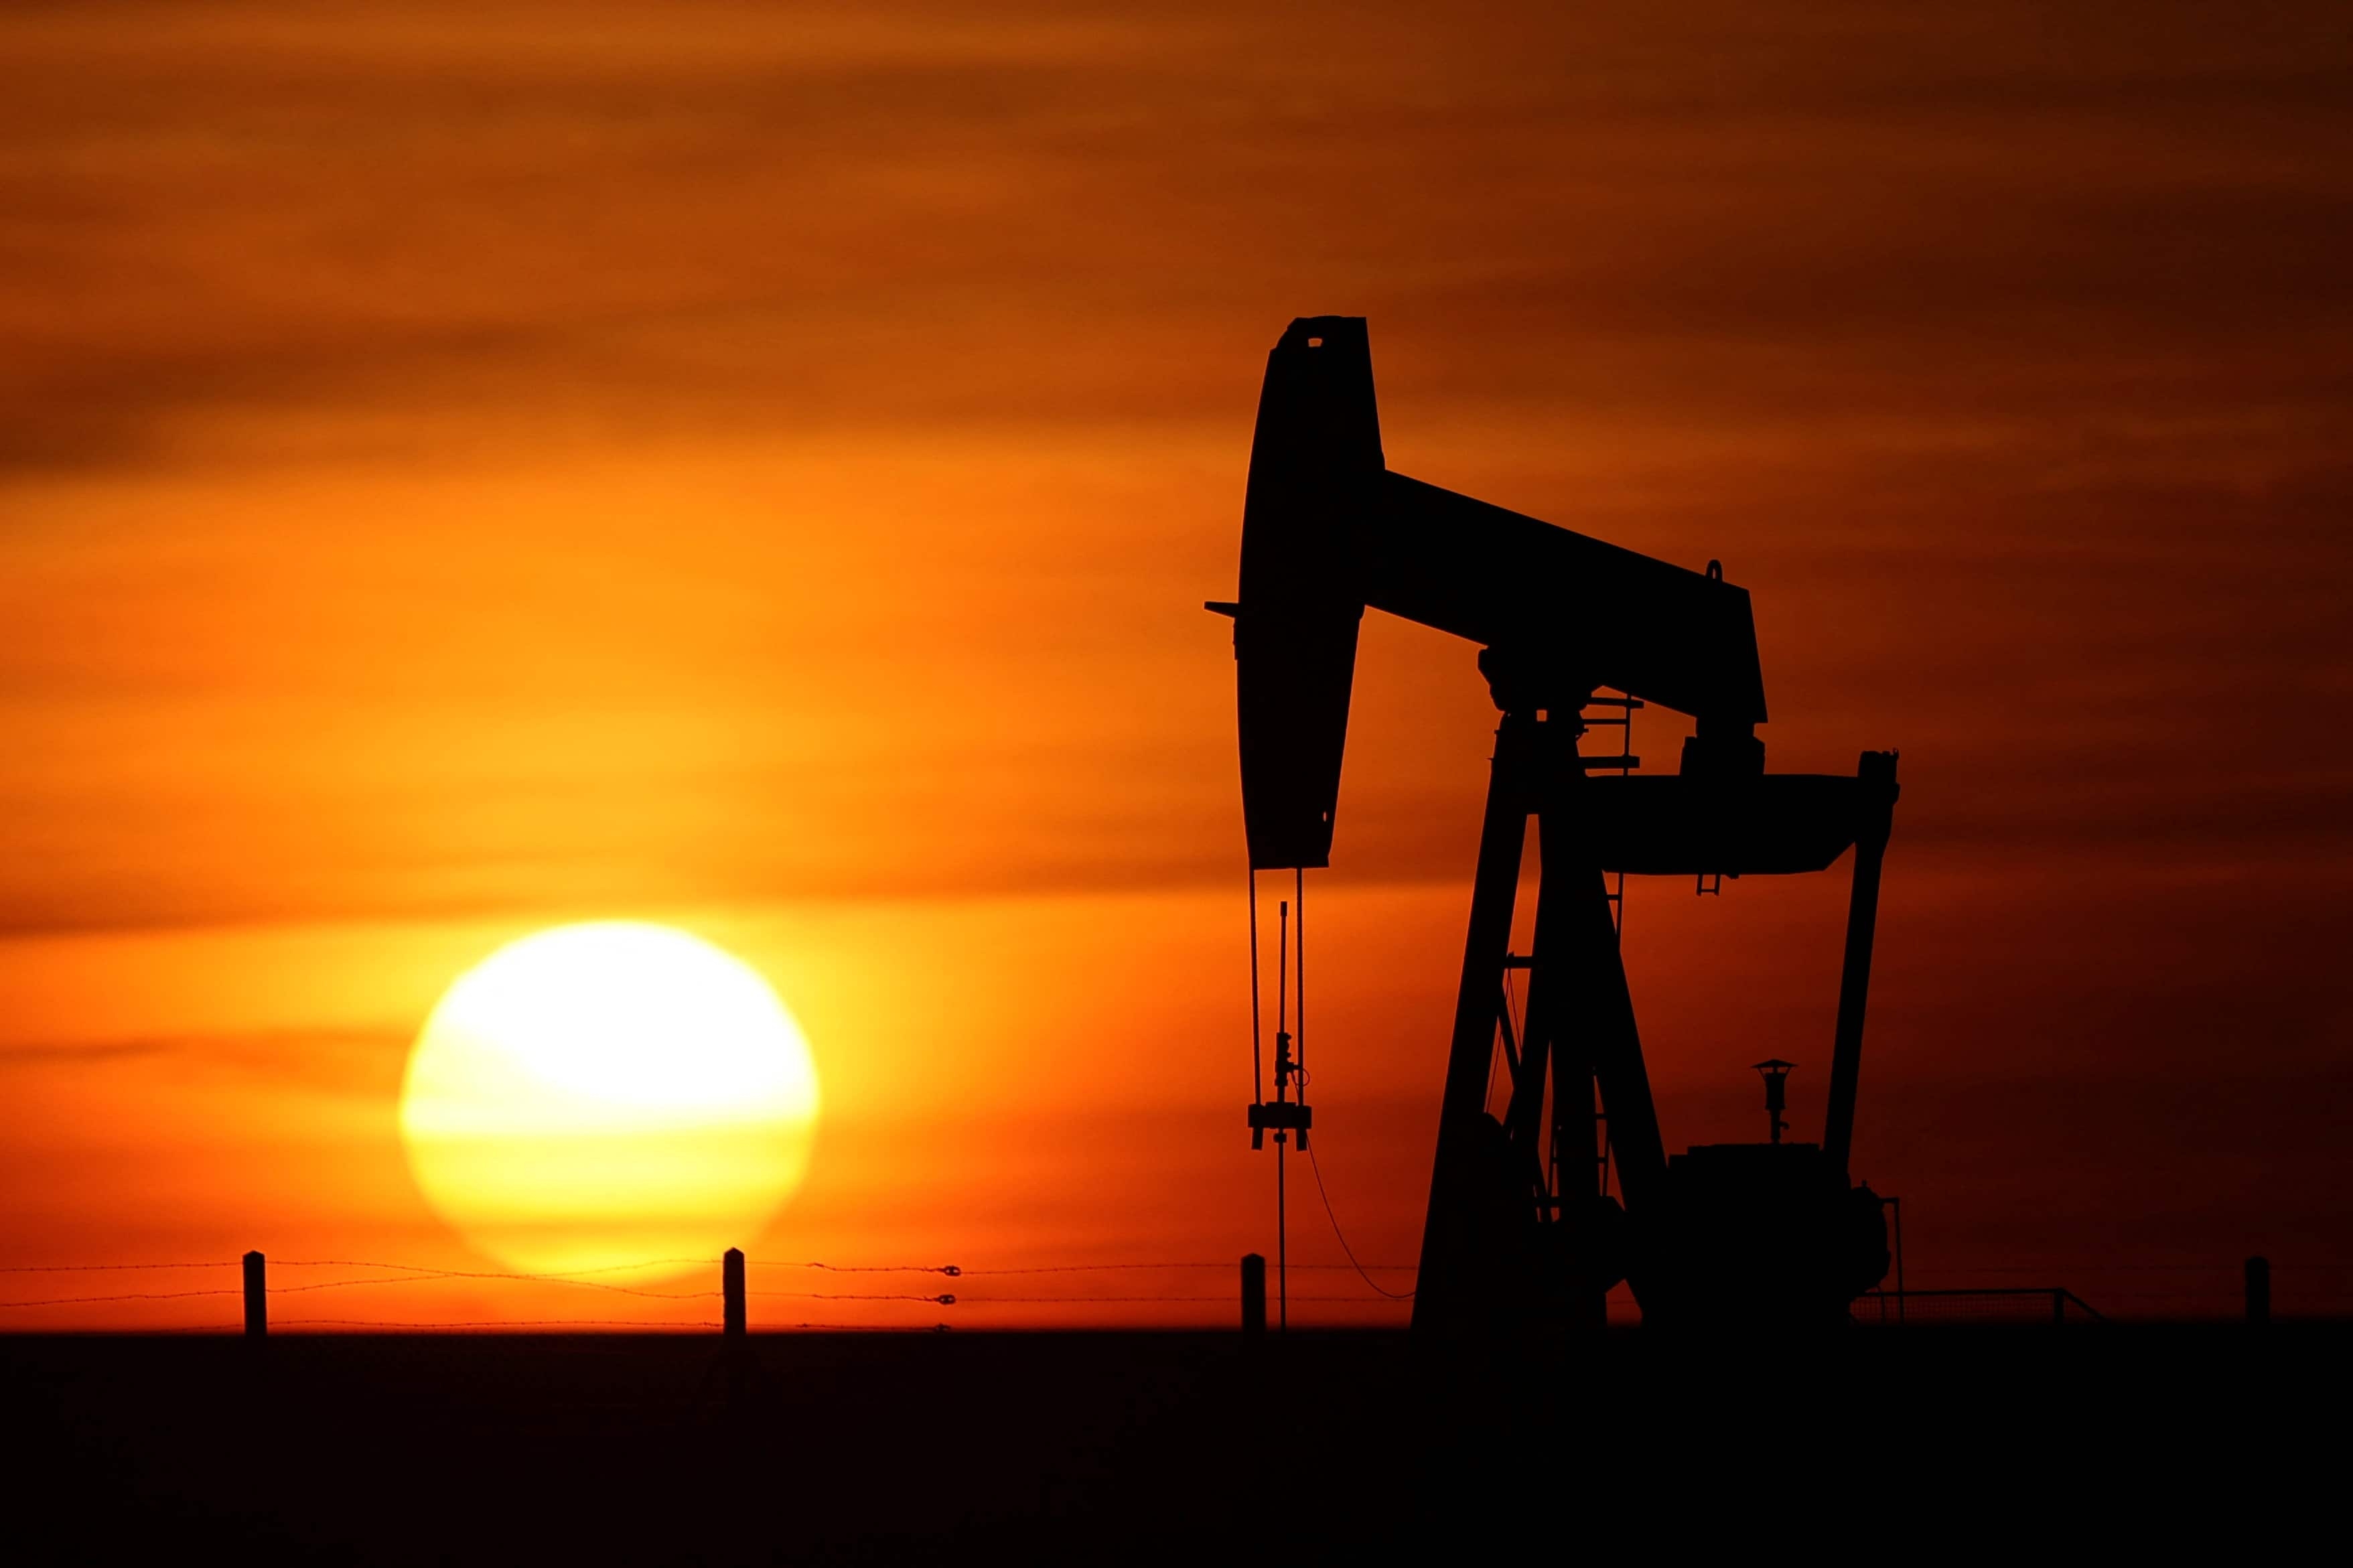 Oil lost ground for the fifth time in the last six days on Wednesday as traders reacted to hoped-for progress in Russia-Ukraine peace talks and a surprising increase in US inventories. Brent traded in a $6 range, between $97.55 and $103.70 before settling at $98.02, down $1.89 a barrel, or 1.9 percent.